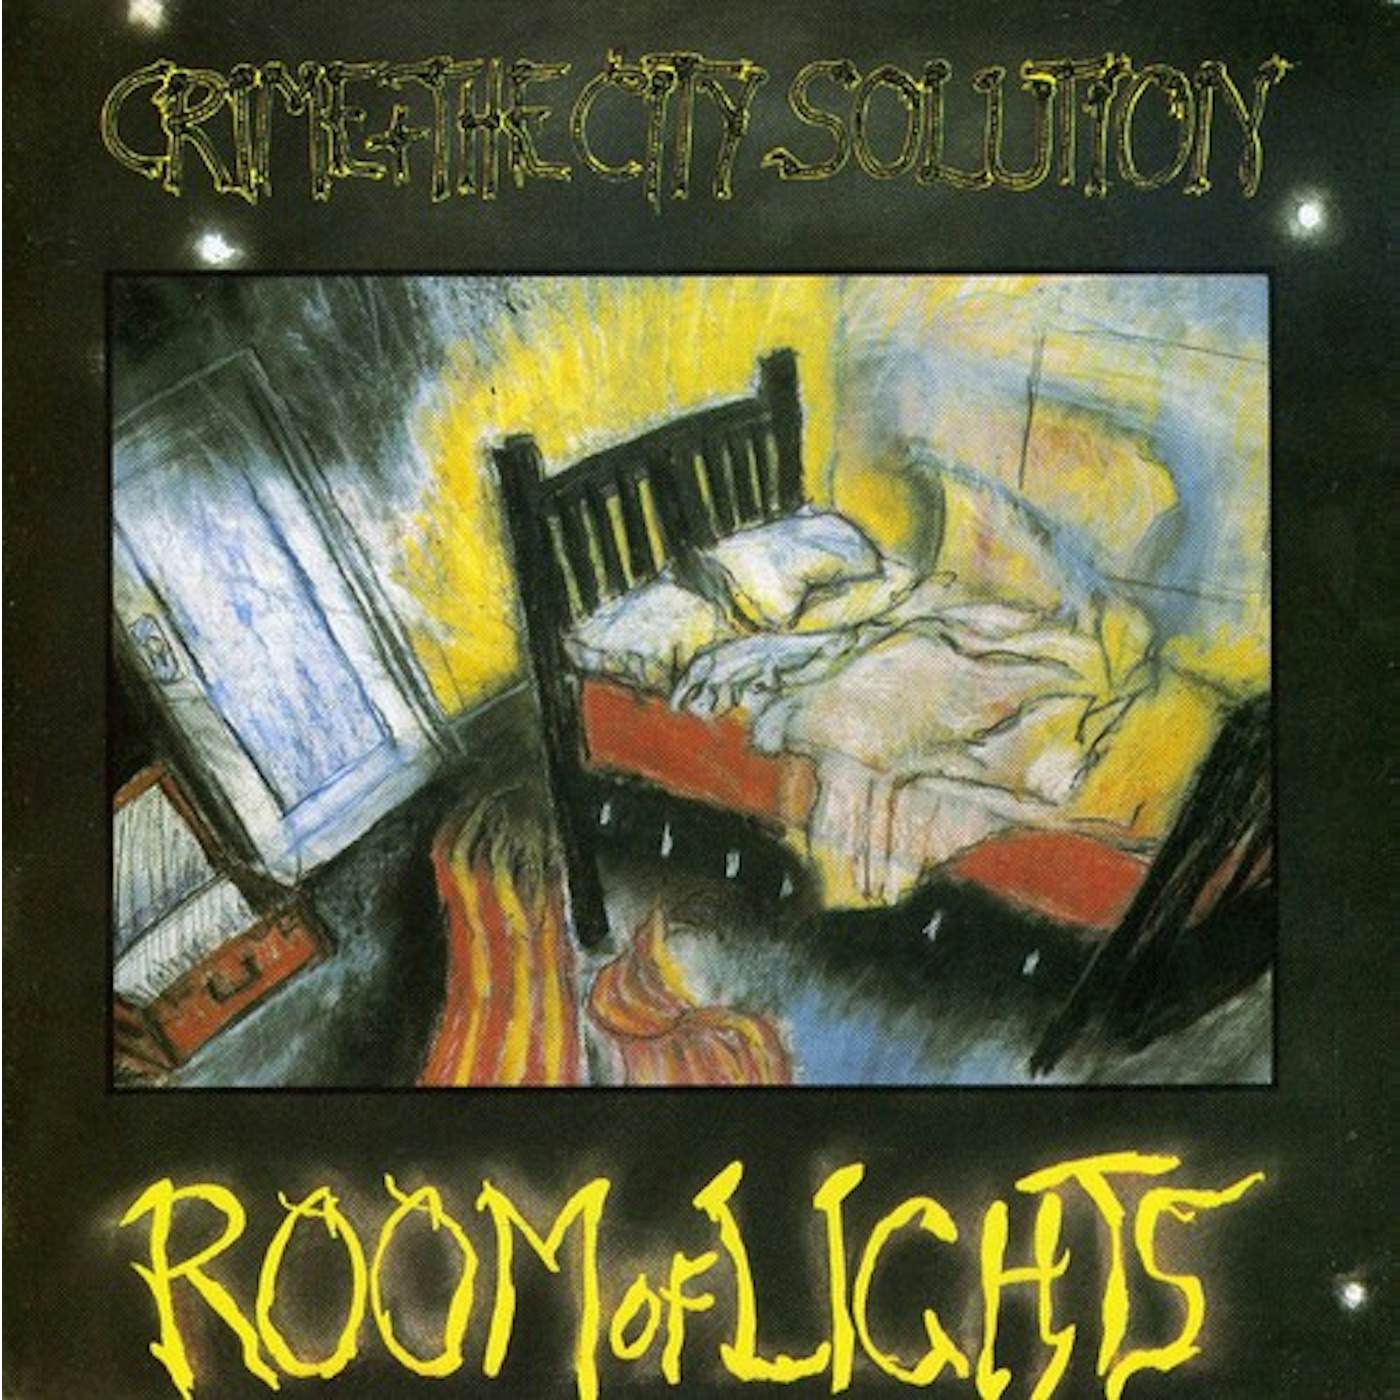 Crime & the City Solution ROOM OF LIGHTS CD